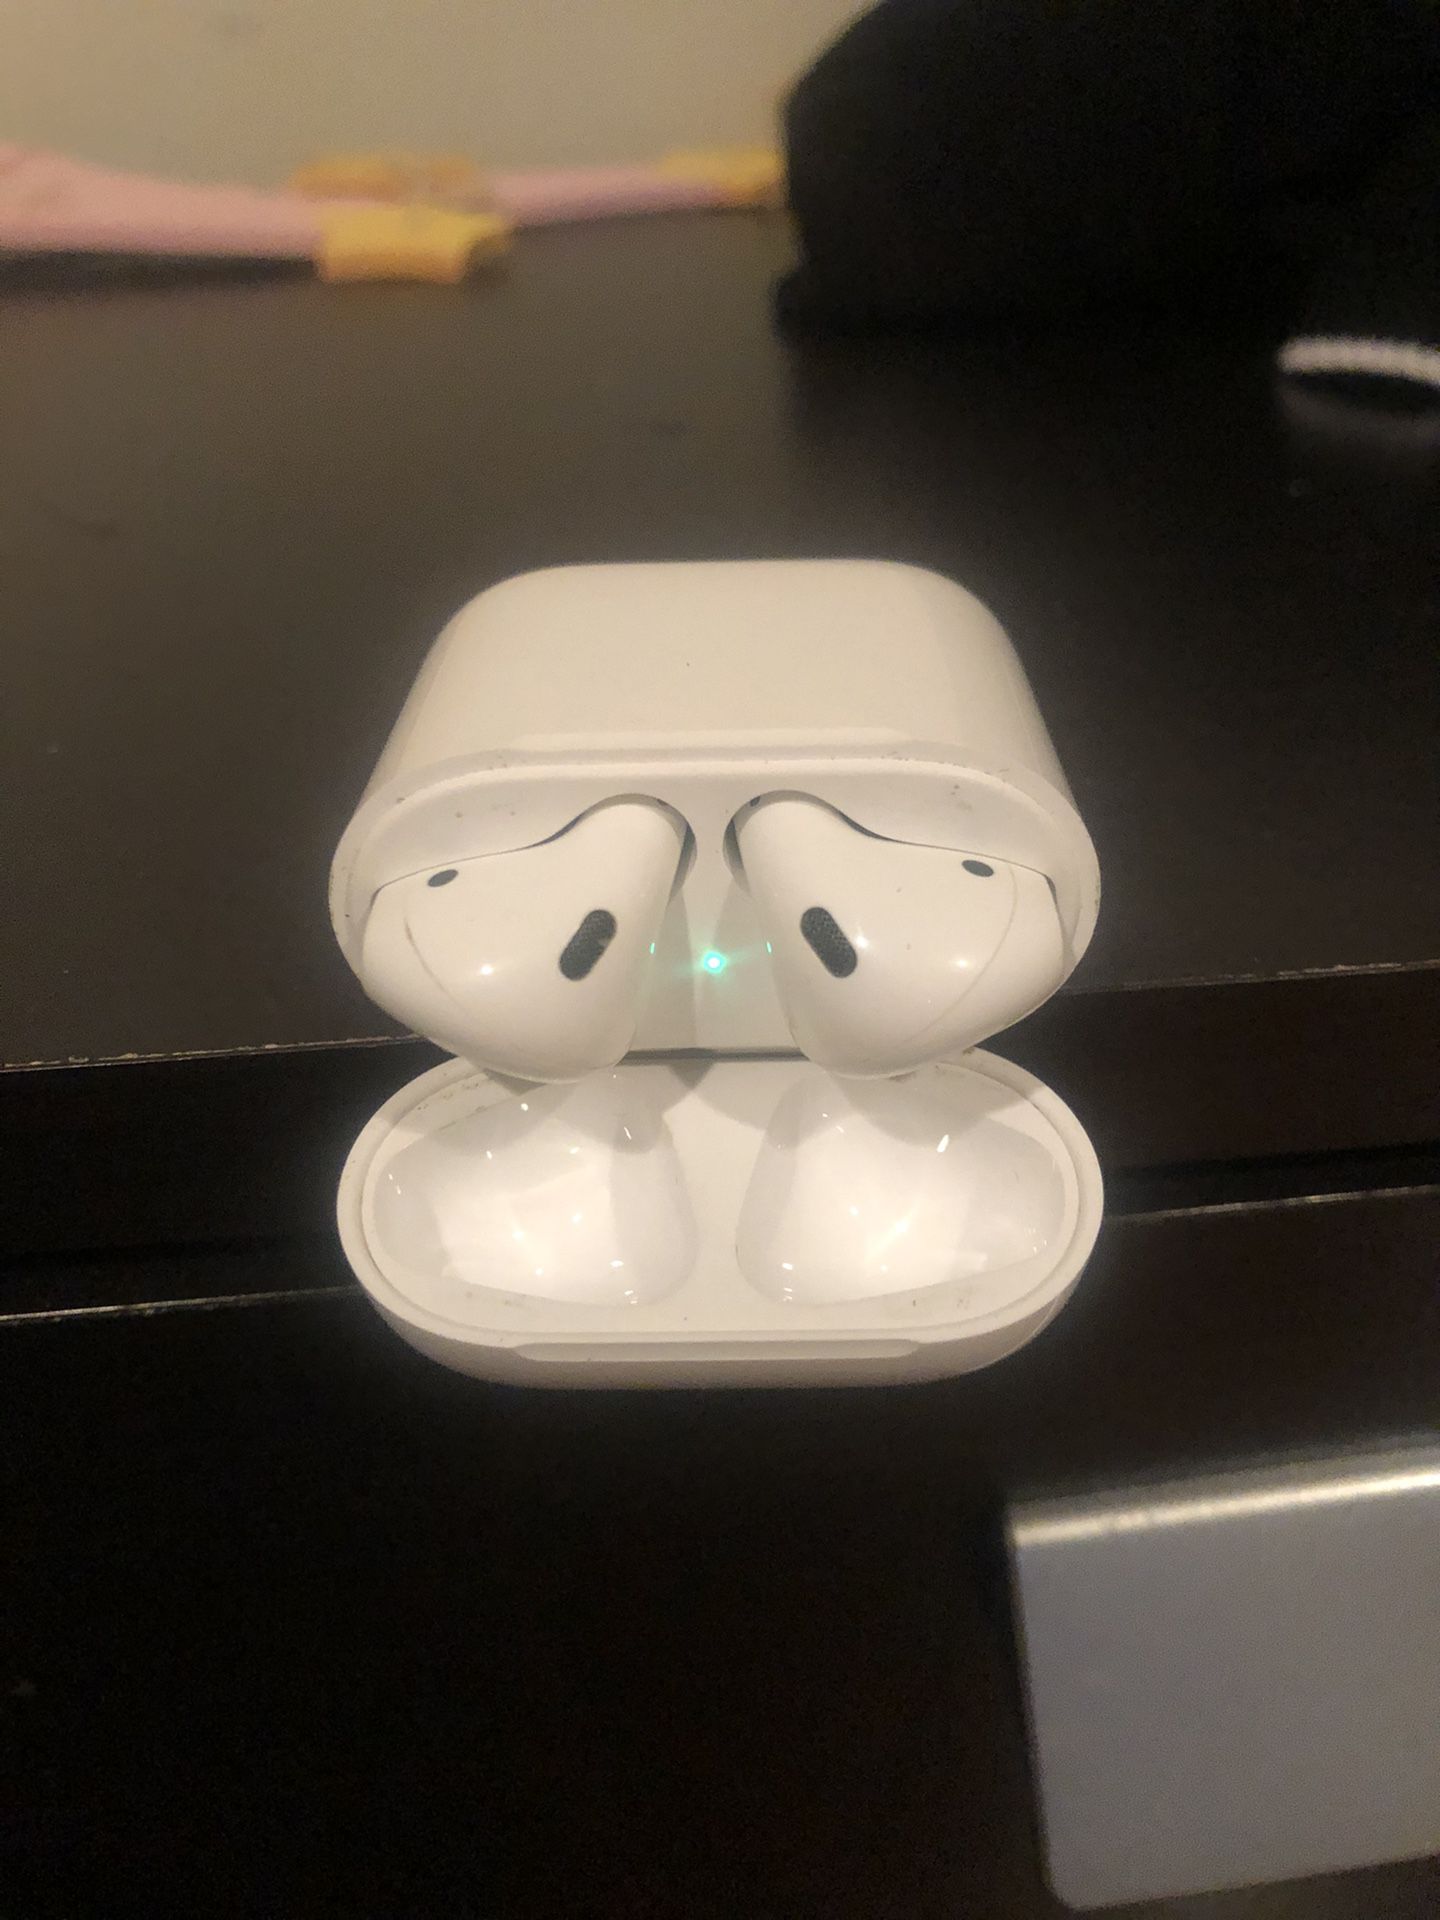 Apple airpods air pods wireless headphone speakers